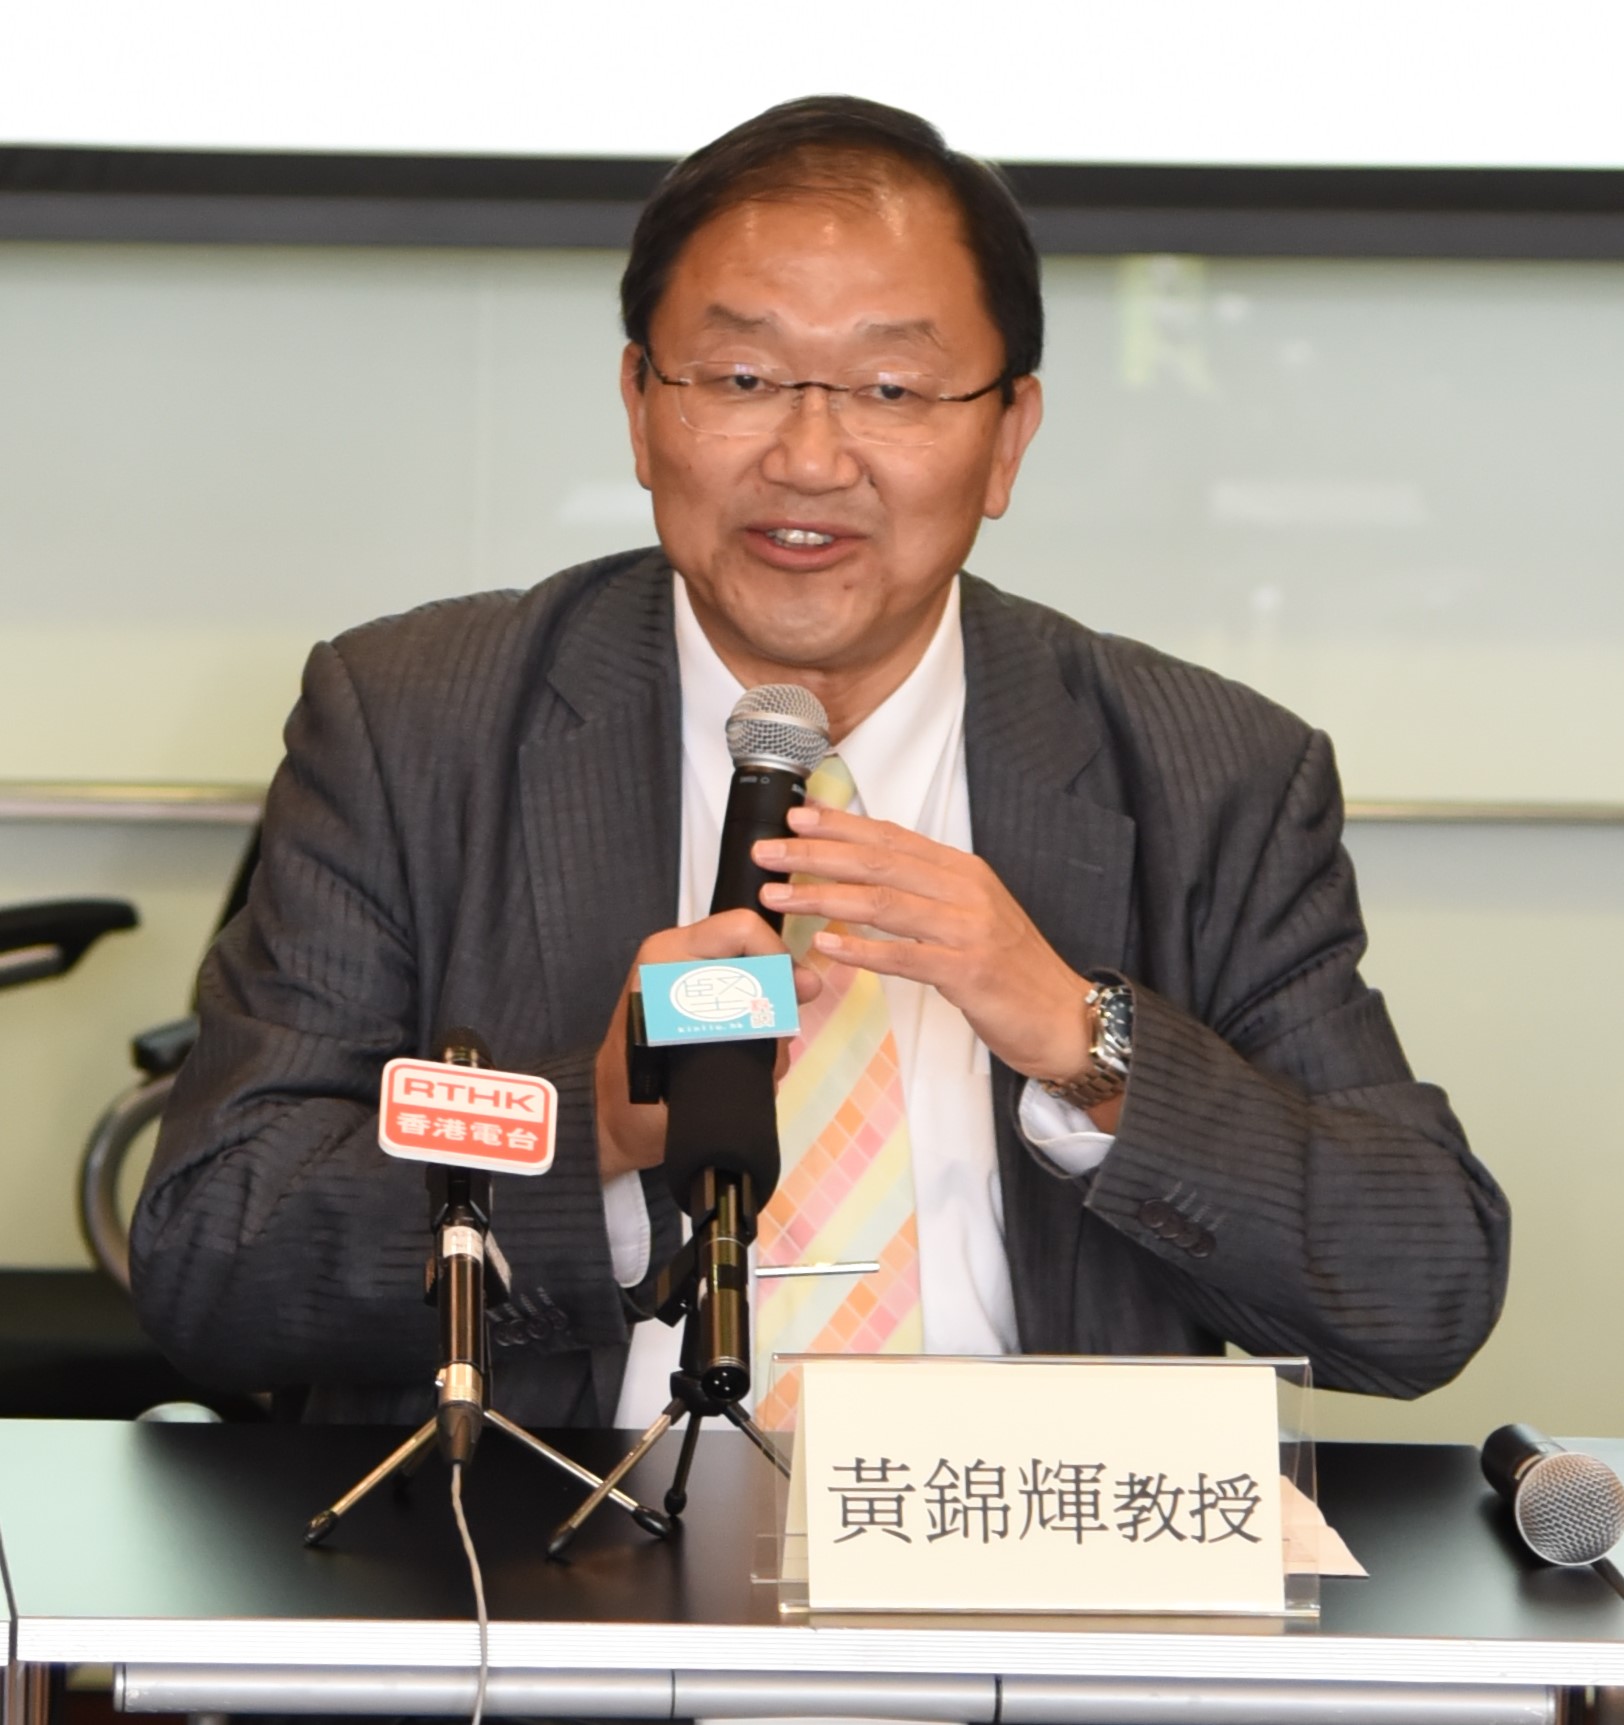 Professor William Wong Kam-fai, Hong Kong member of the Chinese People's Political Consultative Conference (CPPCC), Associate Dean (External Affairs) of the Faculty of Engineering of the Chinese University of Hong Kong and member of the Legislative Council